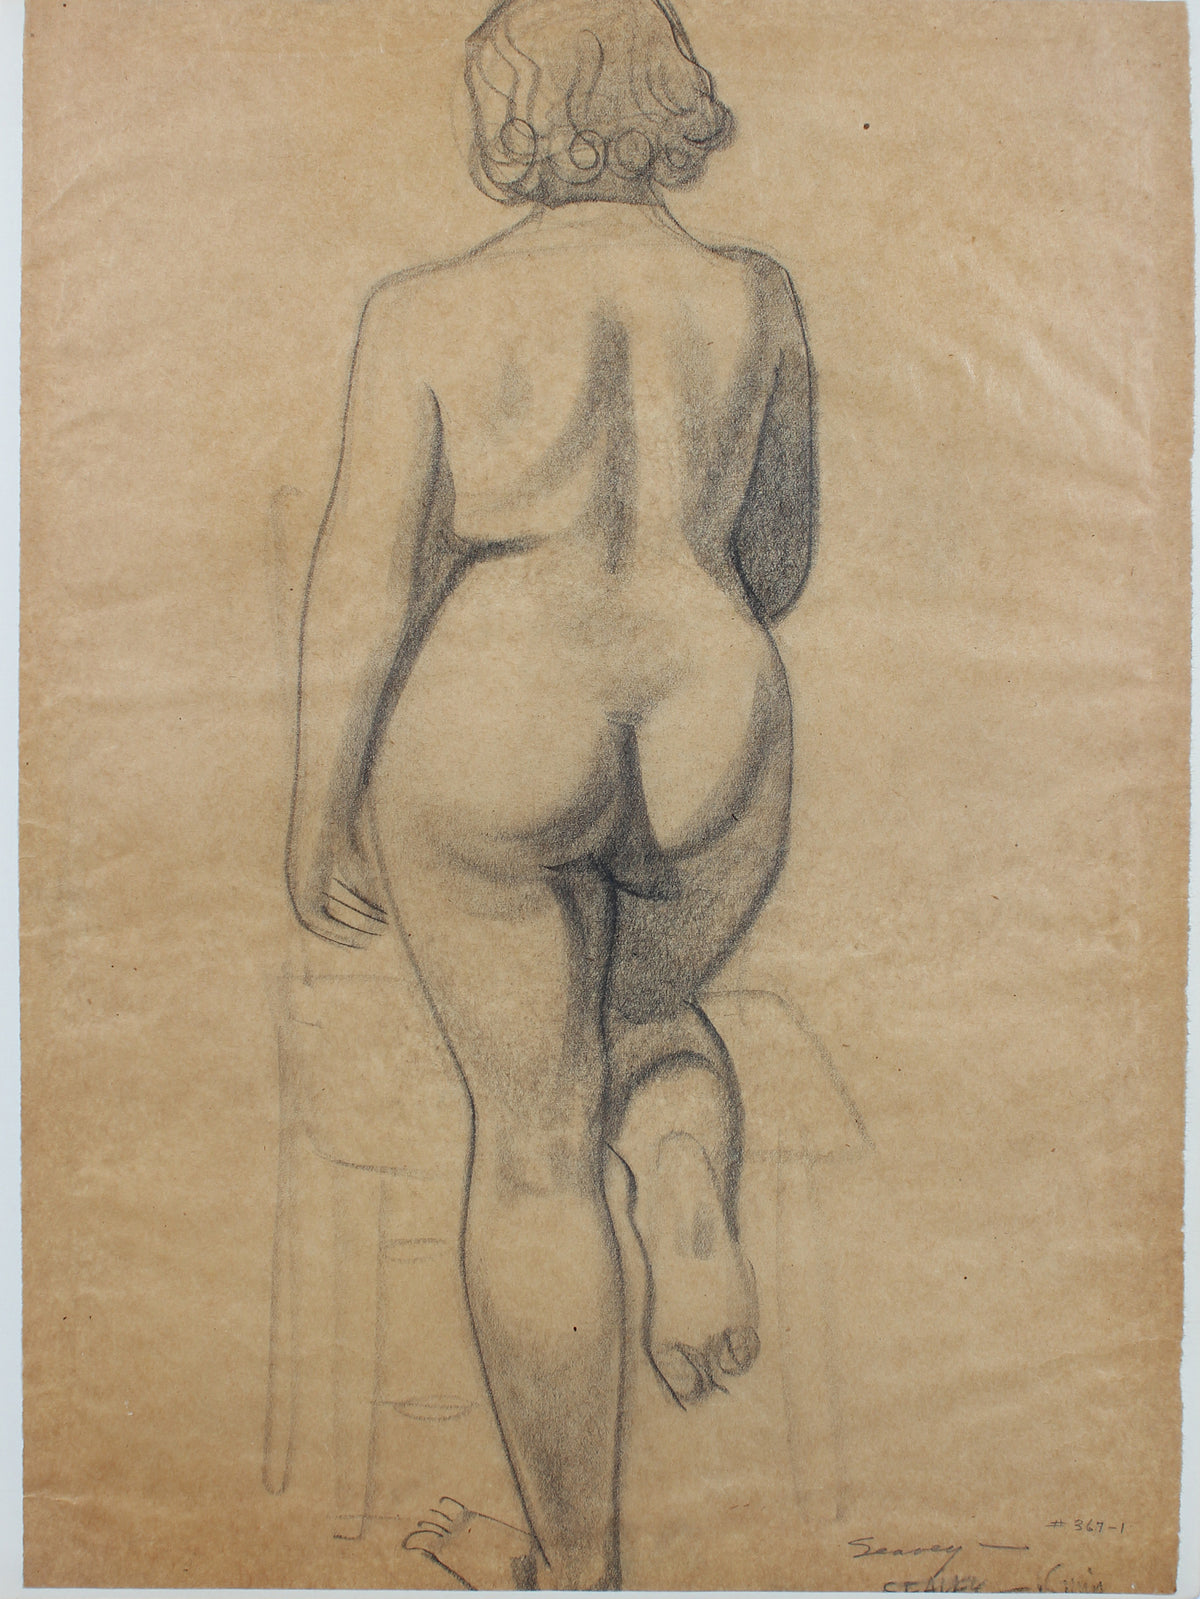 Figurative Study from Behind &lt;br&gt;1920-30s Charcoal &lt;br&gt;&lt;br&gt;#9393